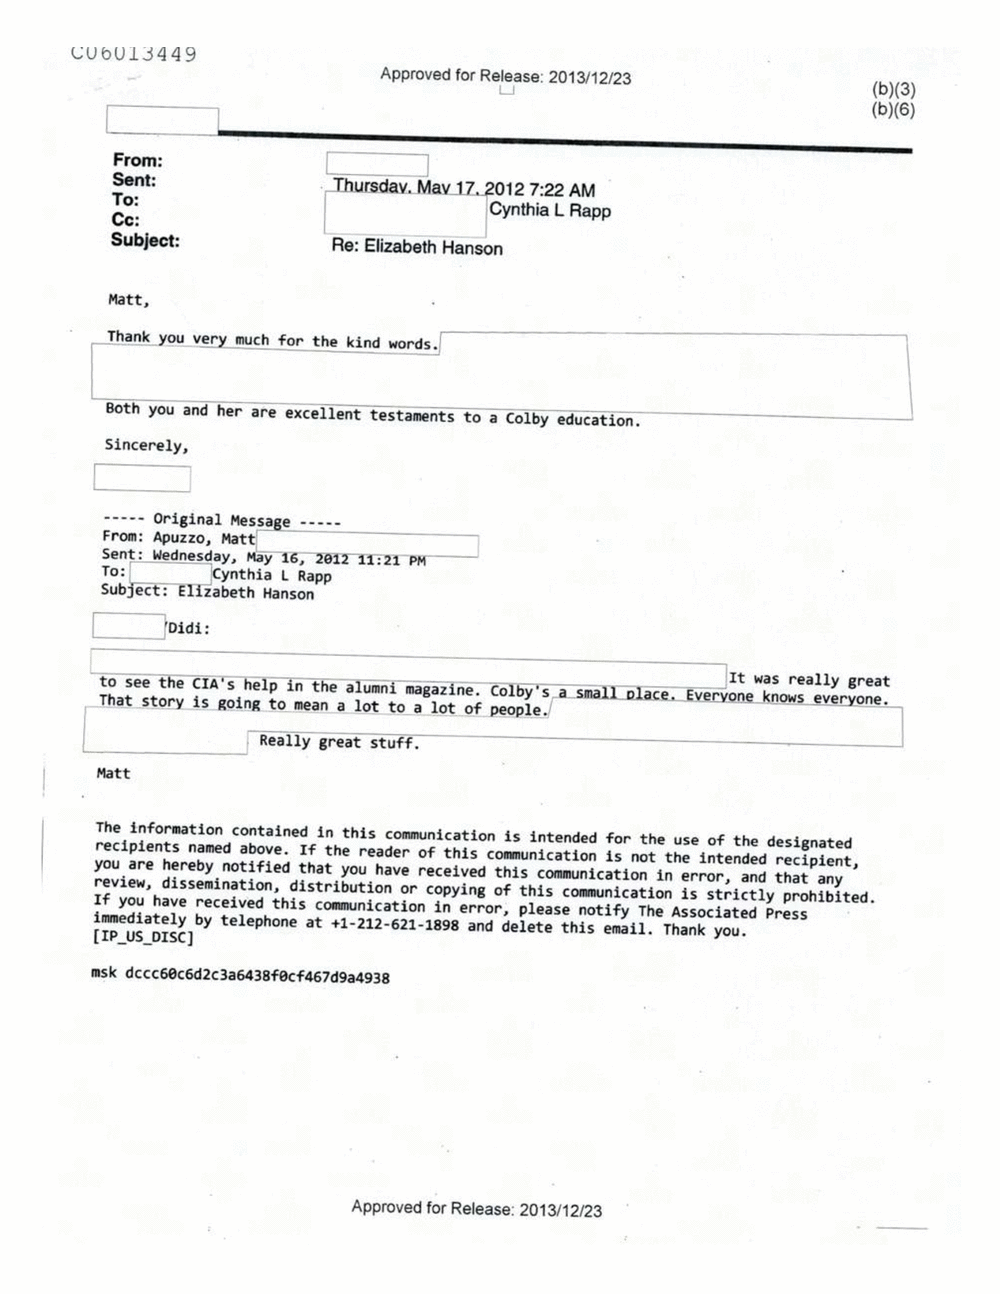 Page 316 from Email Correspondence Between Reporters and CIA Flacks